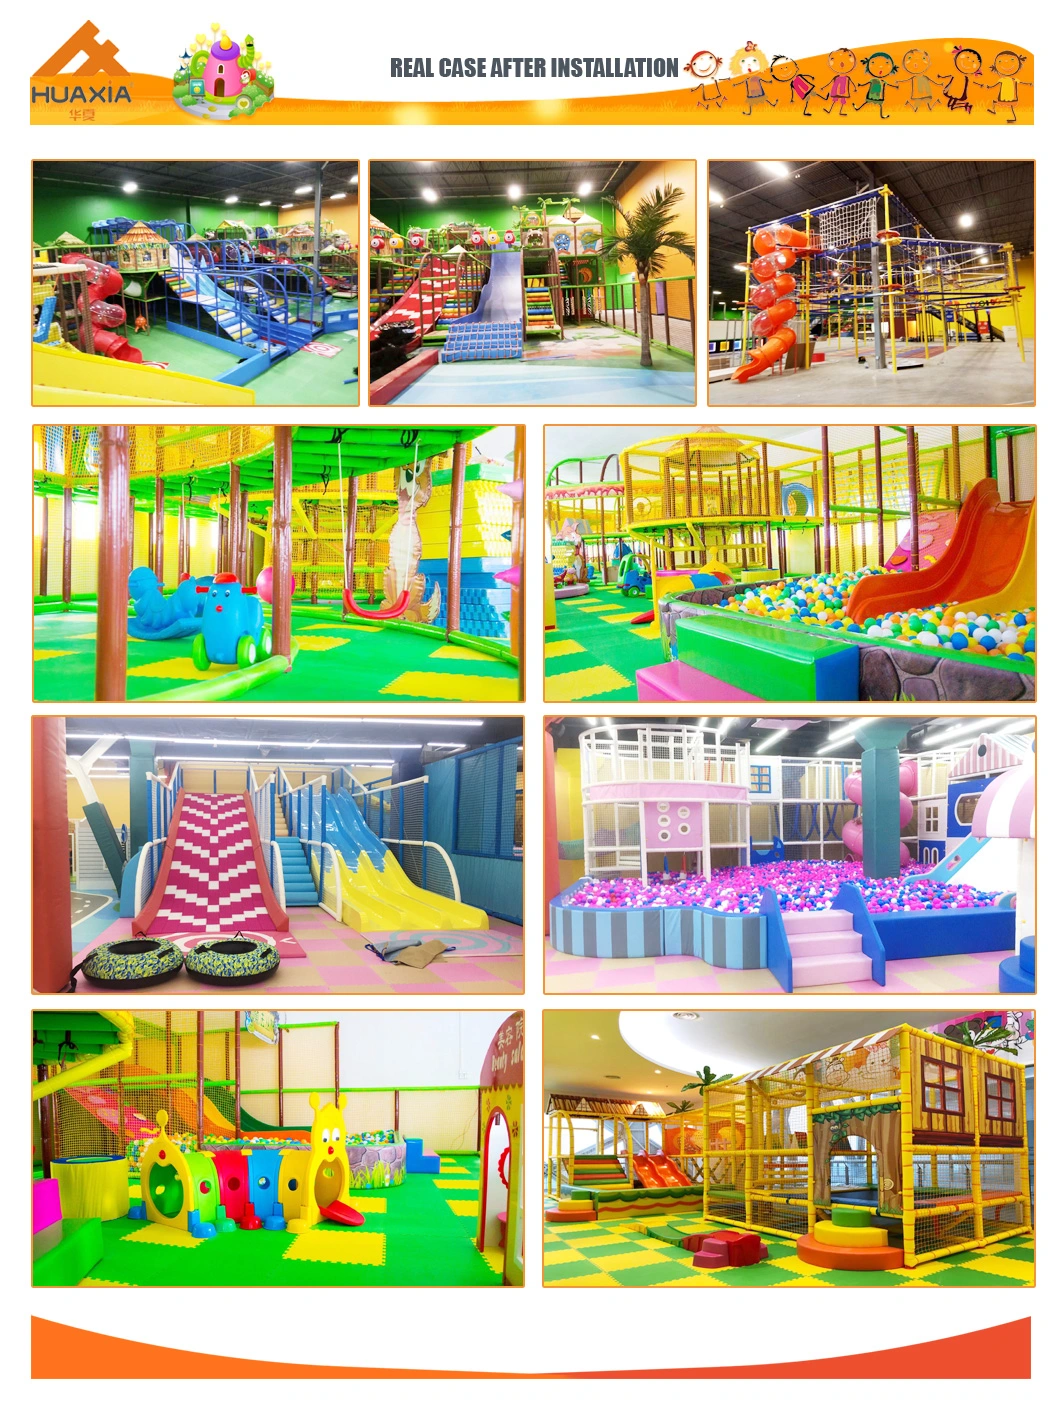 Toddler Fun Safety Colorful Indoor Play Area for Kids, Climbing Structure Indoor Soft Play Equipment